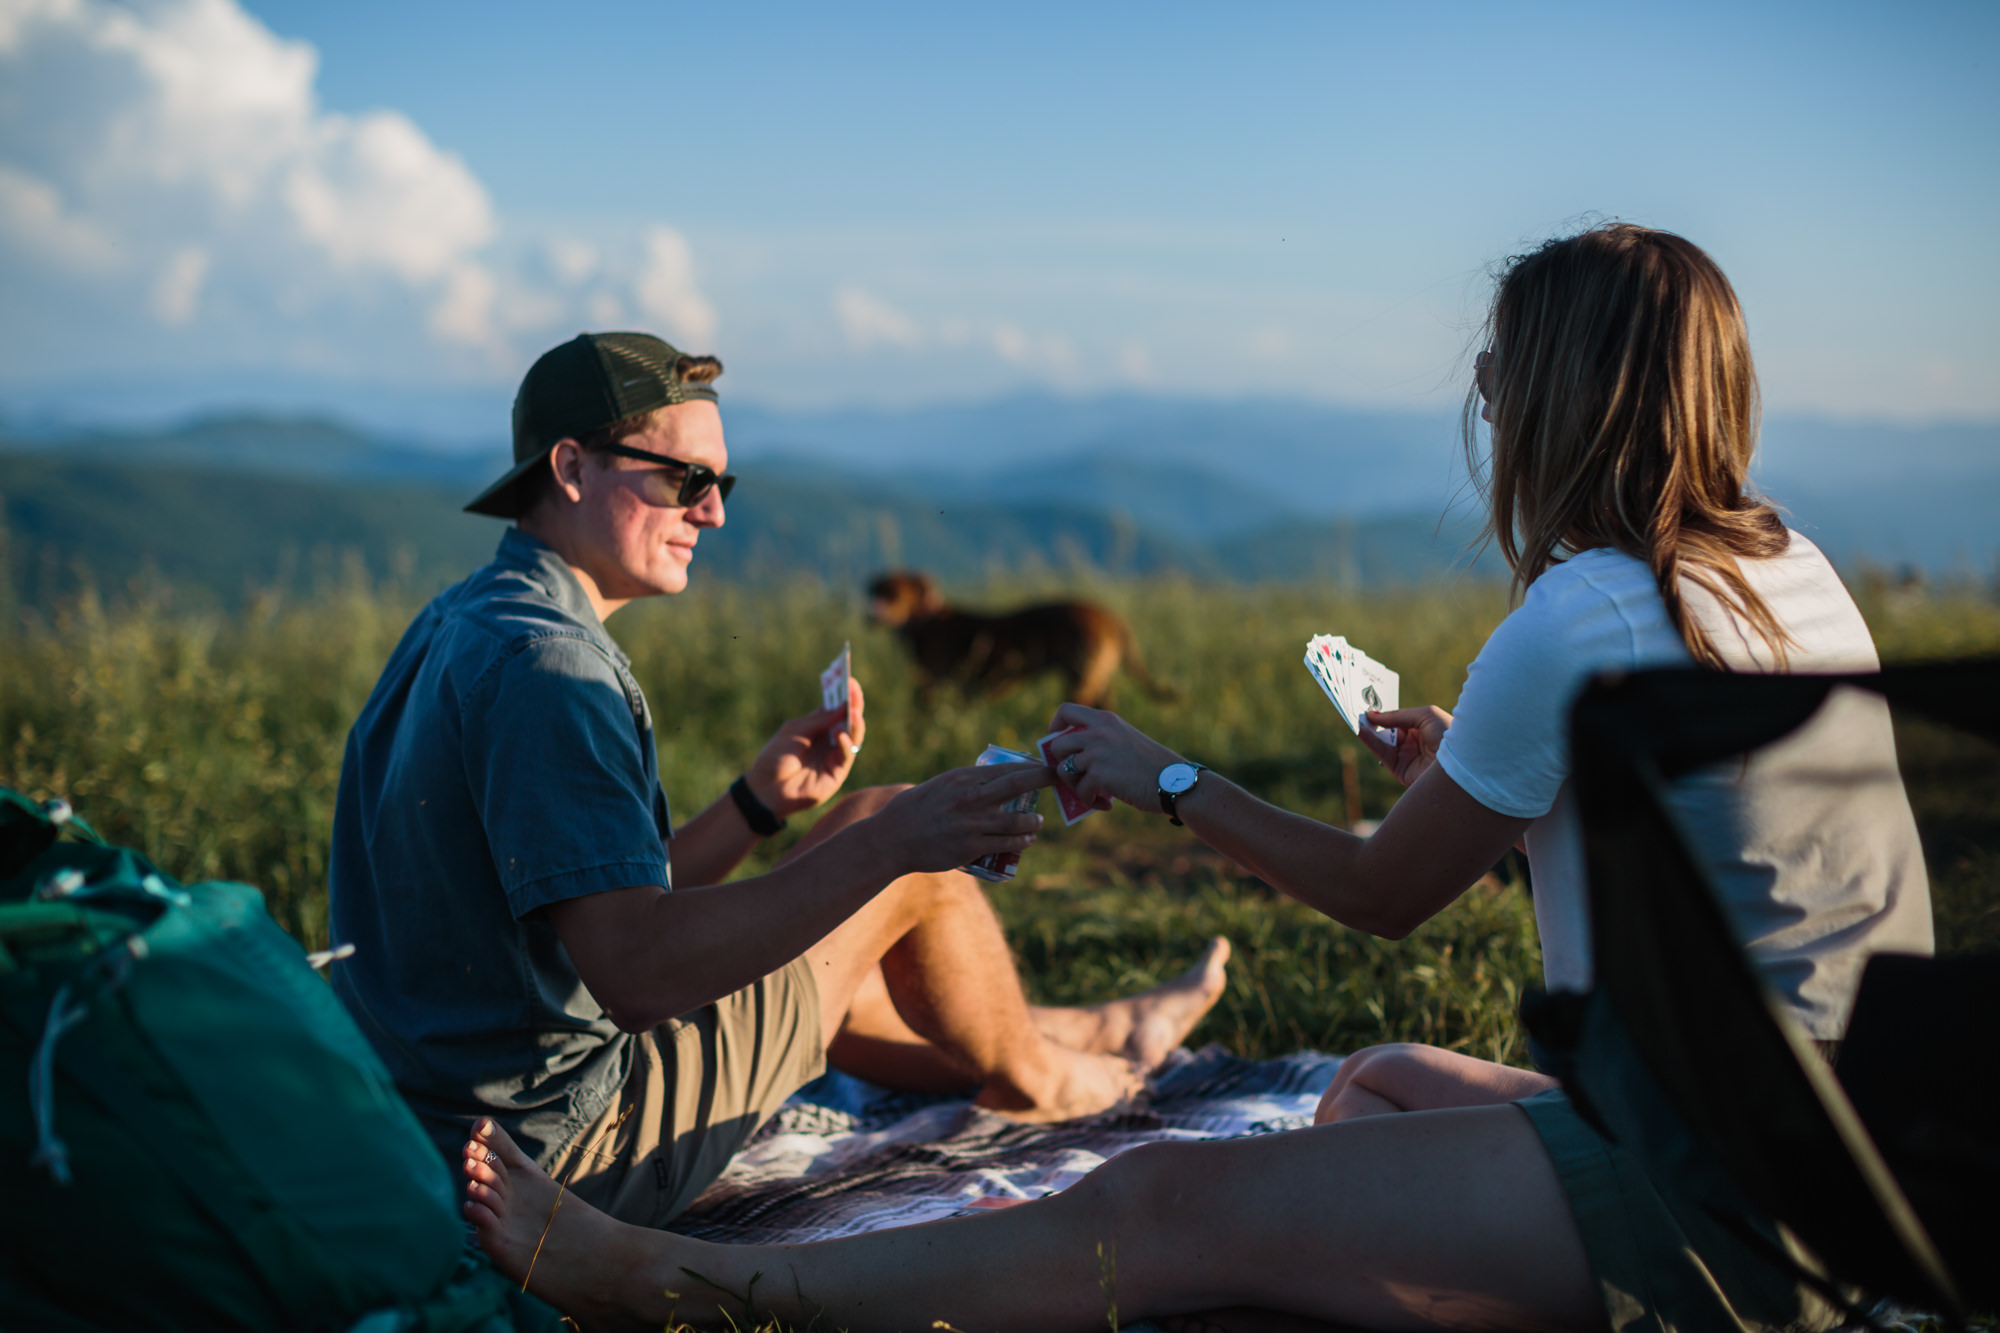 couple playing cards on max patch, couples mountain, mountain engagement, couples camping, dog photography, Knoxville, couples hiking, camping with dog, North Carolina hiking, summer engagement photos, Tennessee Photography, Tennessee Photographer, Tennessee Photos, Tennessee Engagement Photography, Tennessee Engagement Photos, Tennessee Engagement Photographer, Tennessee Portrait Photographer, Knoxville Engagement, Creative Portraits